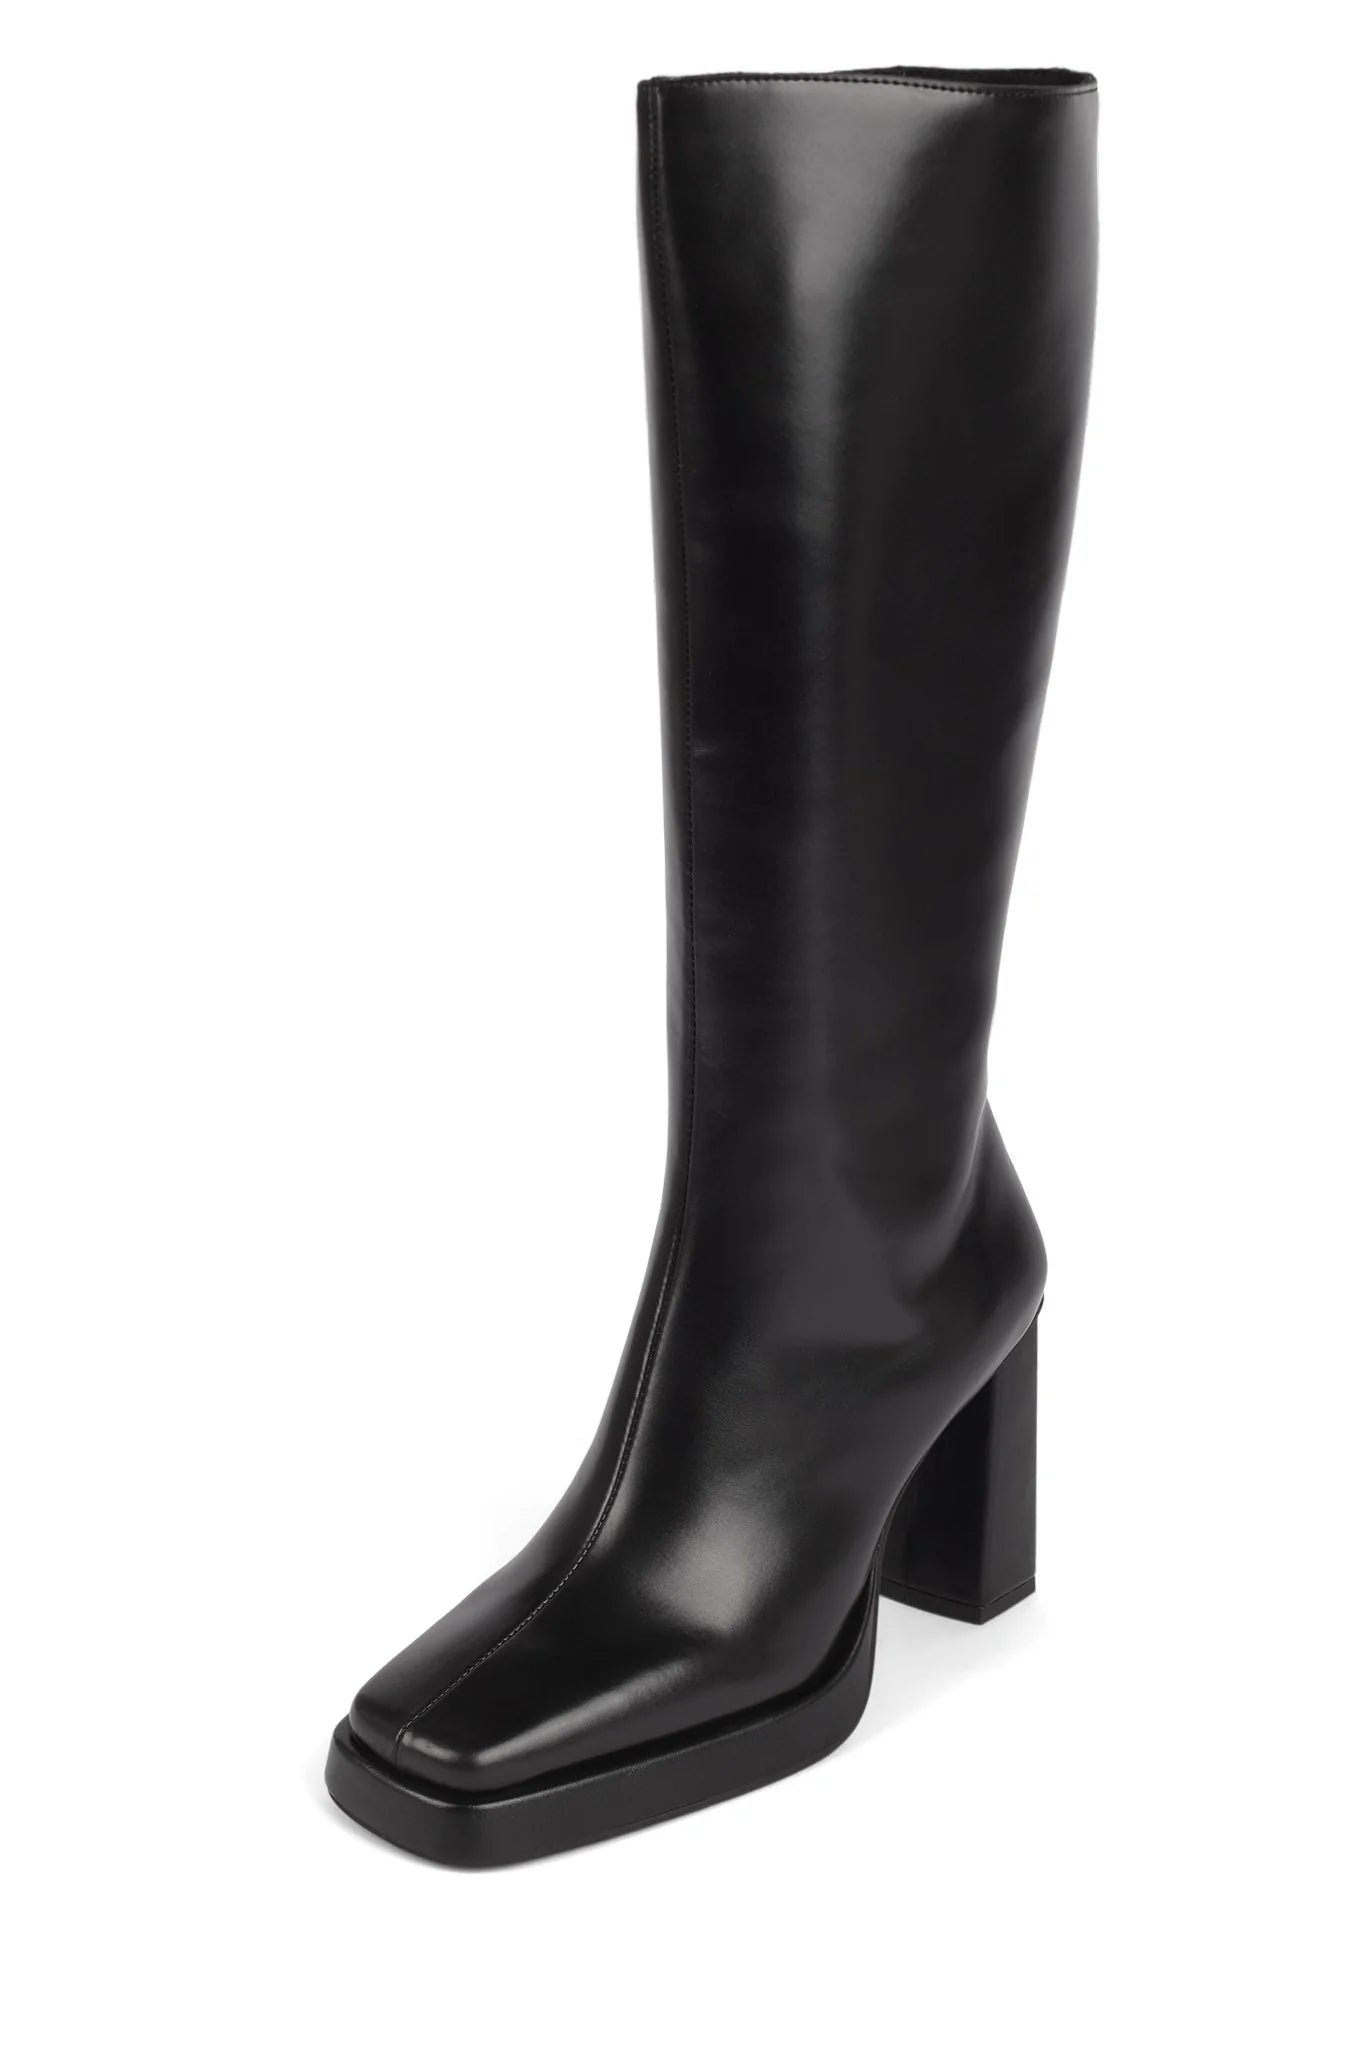 Maximal Leather Boot